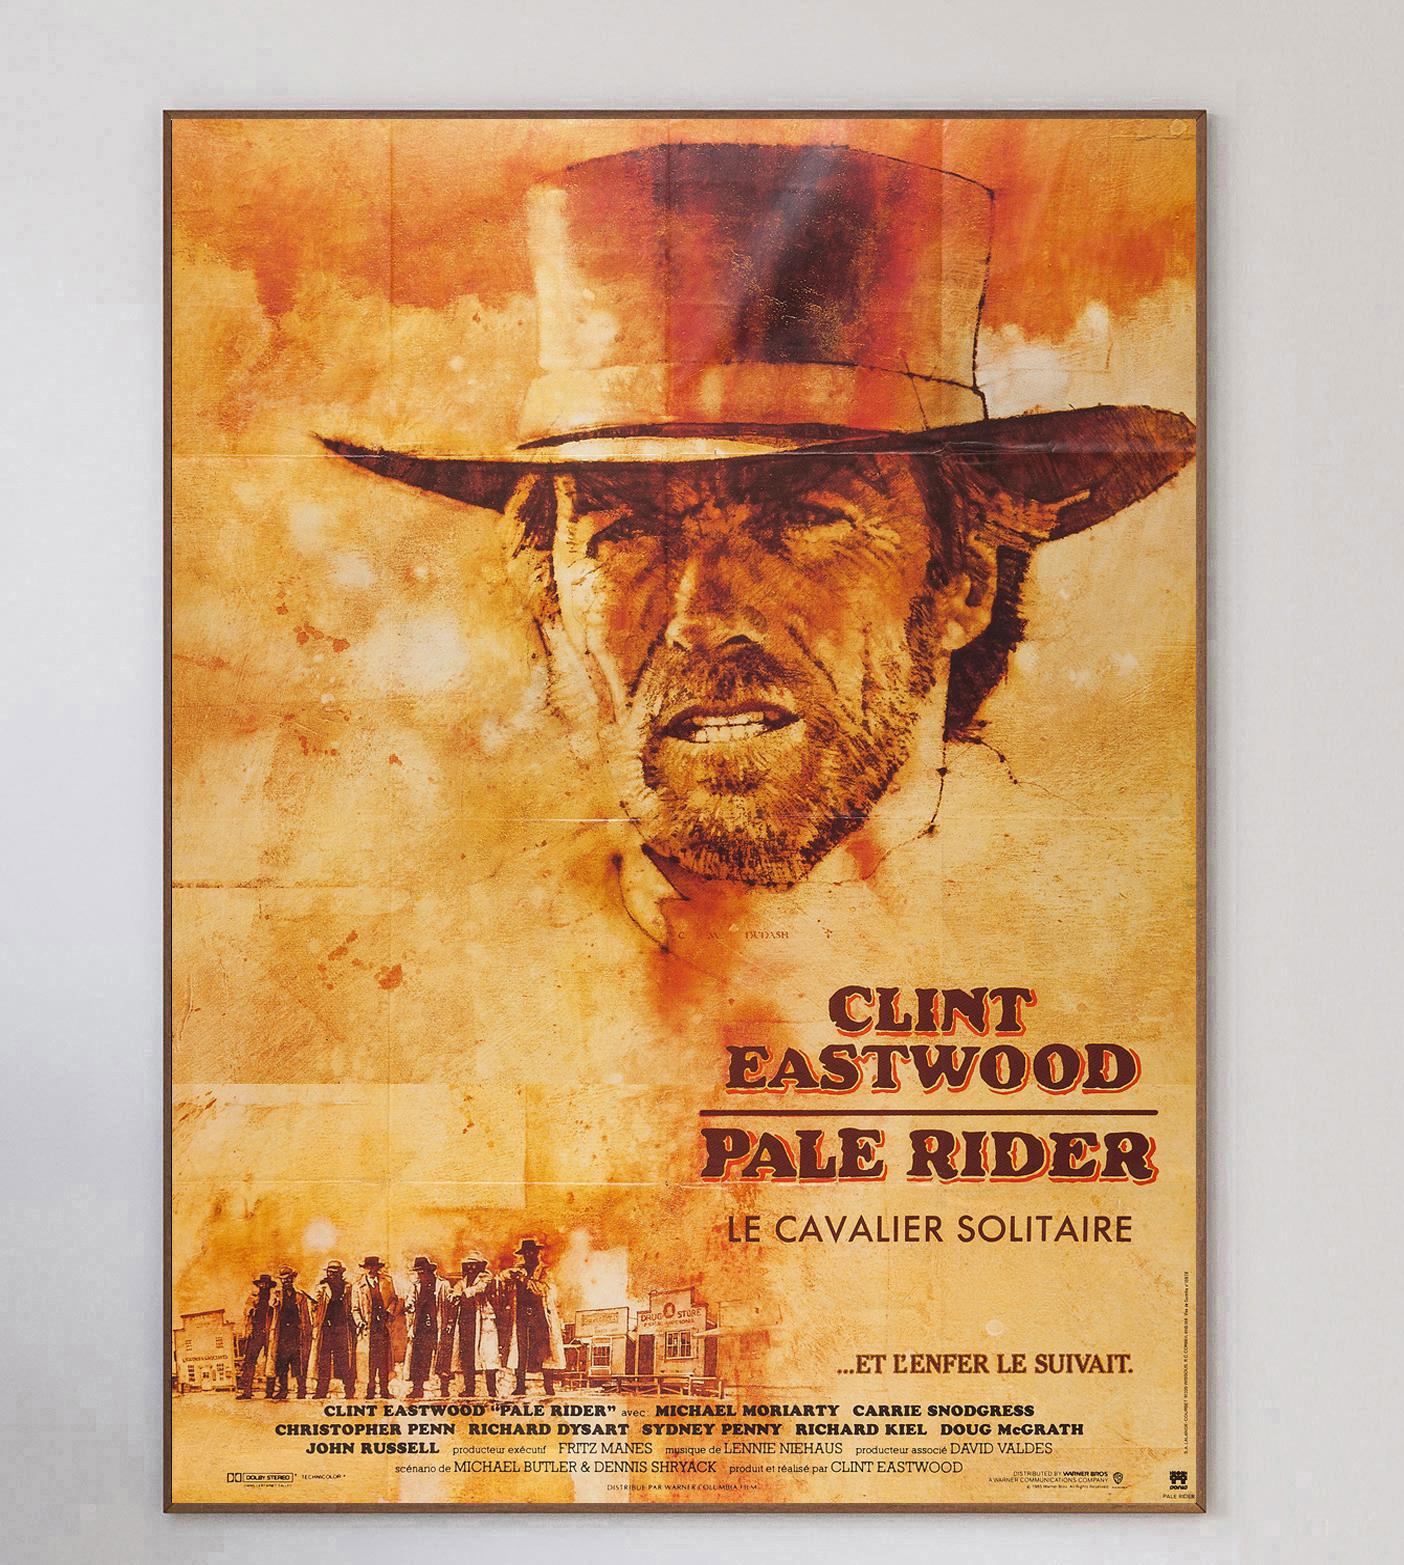 Produced, directed and starring Clint Eastwood, 